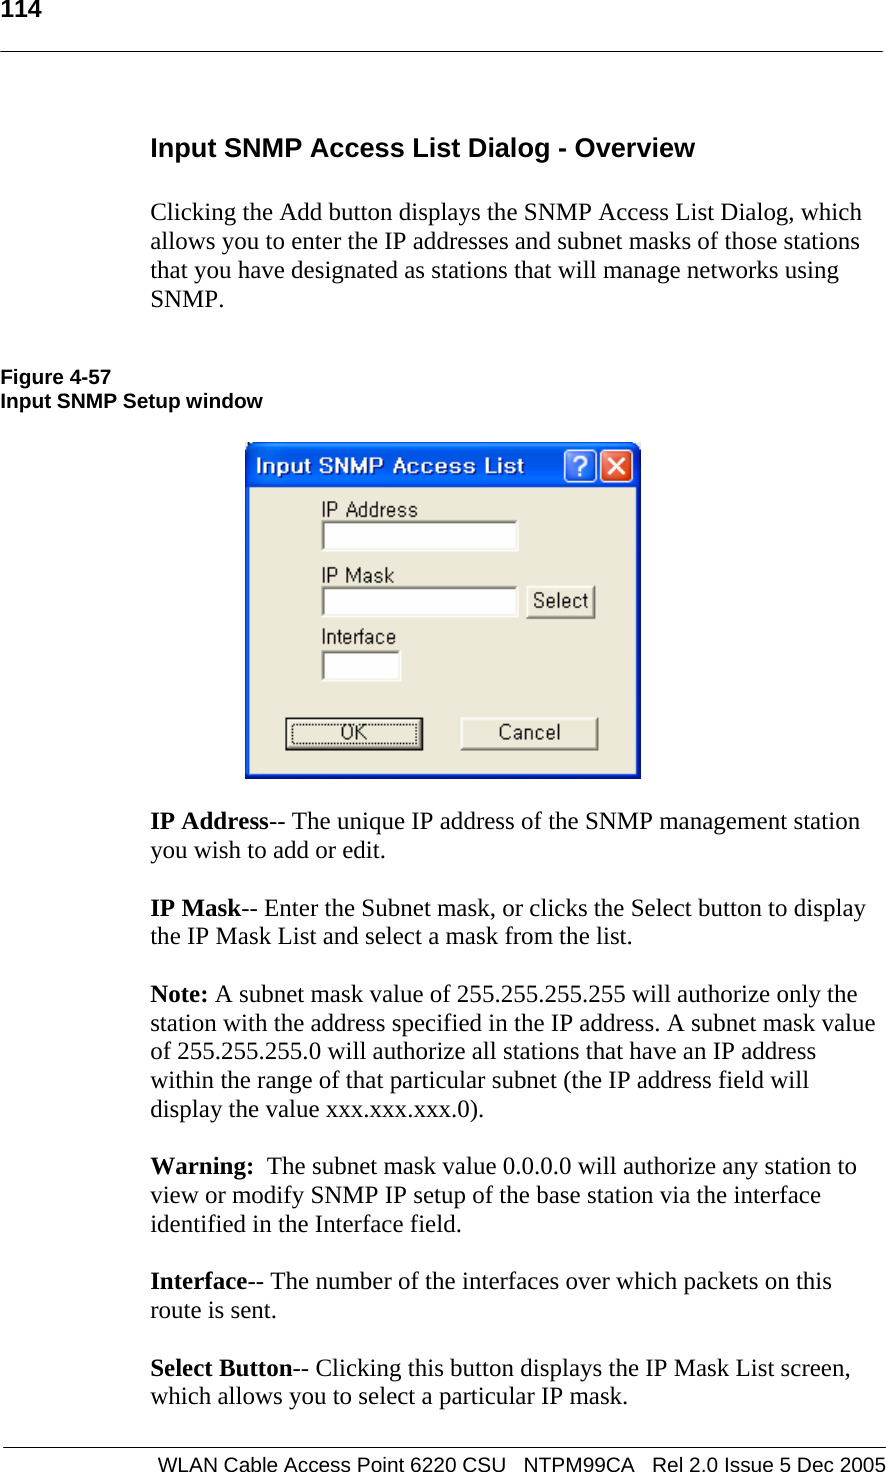   114  WLAN Cable Access Point 6220 CSU   NTPM99CA   Rel 2.0 Issue 5 Dec 2005 Input SNMP Access List Dialog - Overview  Clicking the Add button displays the SNMP Access List Dialog, which allows you to enter the IP addresses and subnet masks of those stations that you have designated as stations that will manage networks using SNMP.   Figure 4-57 Input SNMP Setup window    IP Address-- The unique IP address of the SNMP management station you wish to add or edit.  IP Mask-- Enter the Subnet mask, or clicks the Select button to display the IP Mask List and select a mask from the list.  Note: A subnet mask value of 255.255.255.255 will authorize only the station with the address specified in the IP address. A subnet mask value of 255.255.255.0 will authorize all stations that have an IP address within the range of that particular subnet (the IP address field will display the value xxx.xxx.xxx.0).   Warning:  The subnet mask value 0.0.0.0 will authorize any station to view or modify SNMP IP setup of the base station via the interface identified in the Interface field.  Interface-- The number of the interfaces over which packets on this route is sent.  Select Button-- Clicking this button displays the IP Mask List screen, which allows you to select a particular IP mask. 